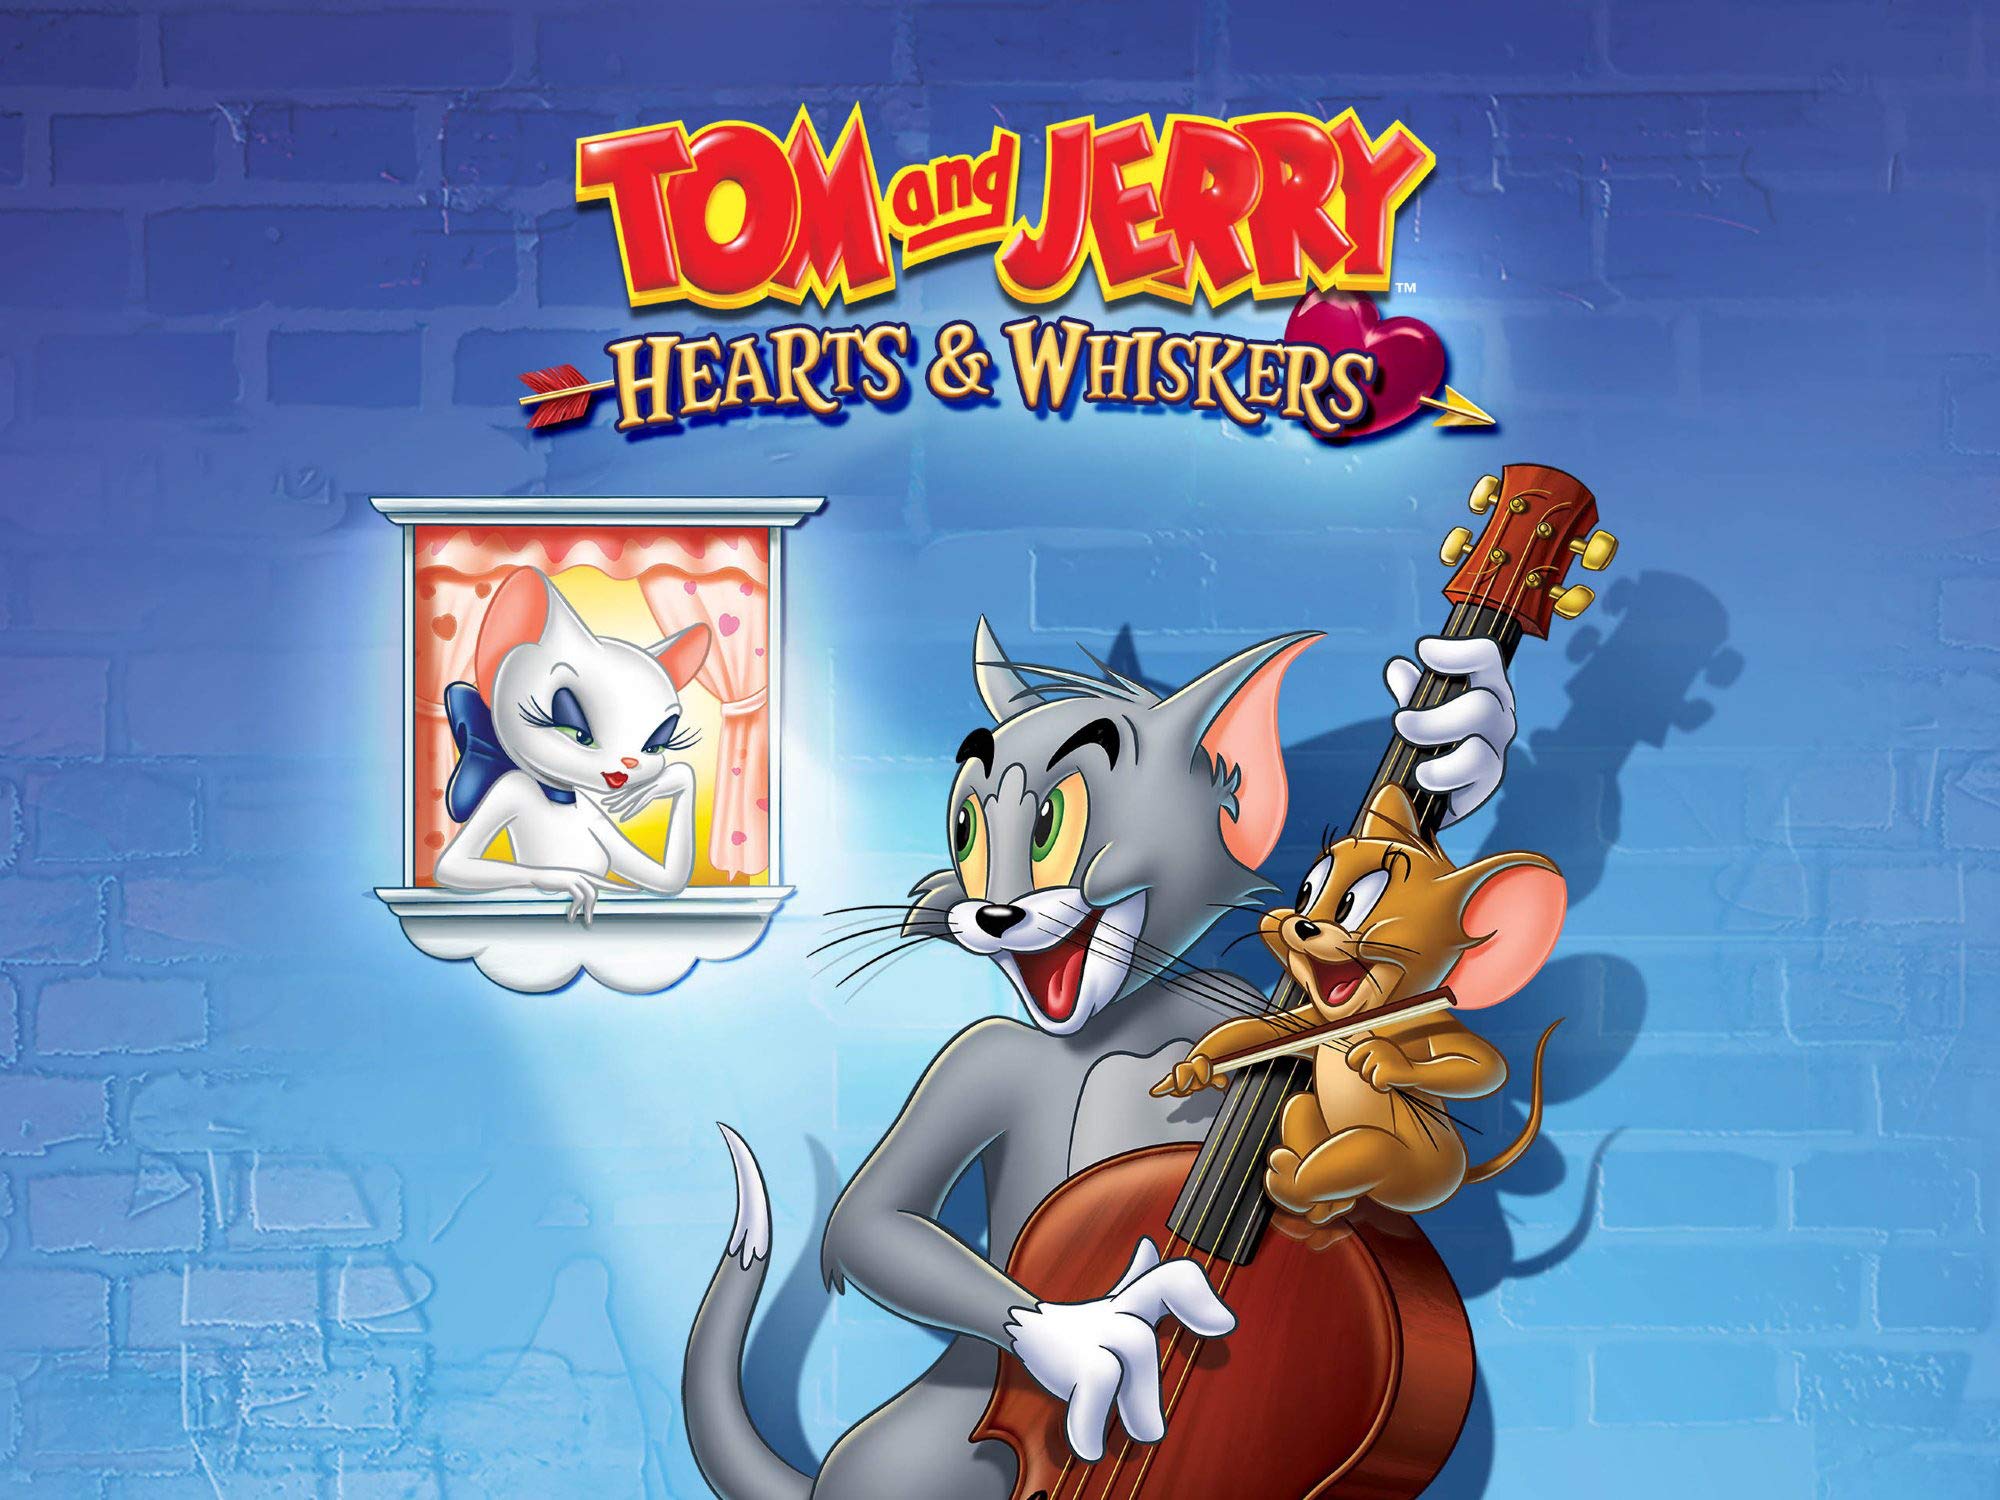 Watch Tom and Jerry: Hearts & Whiskers